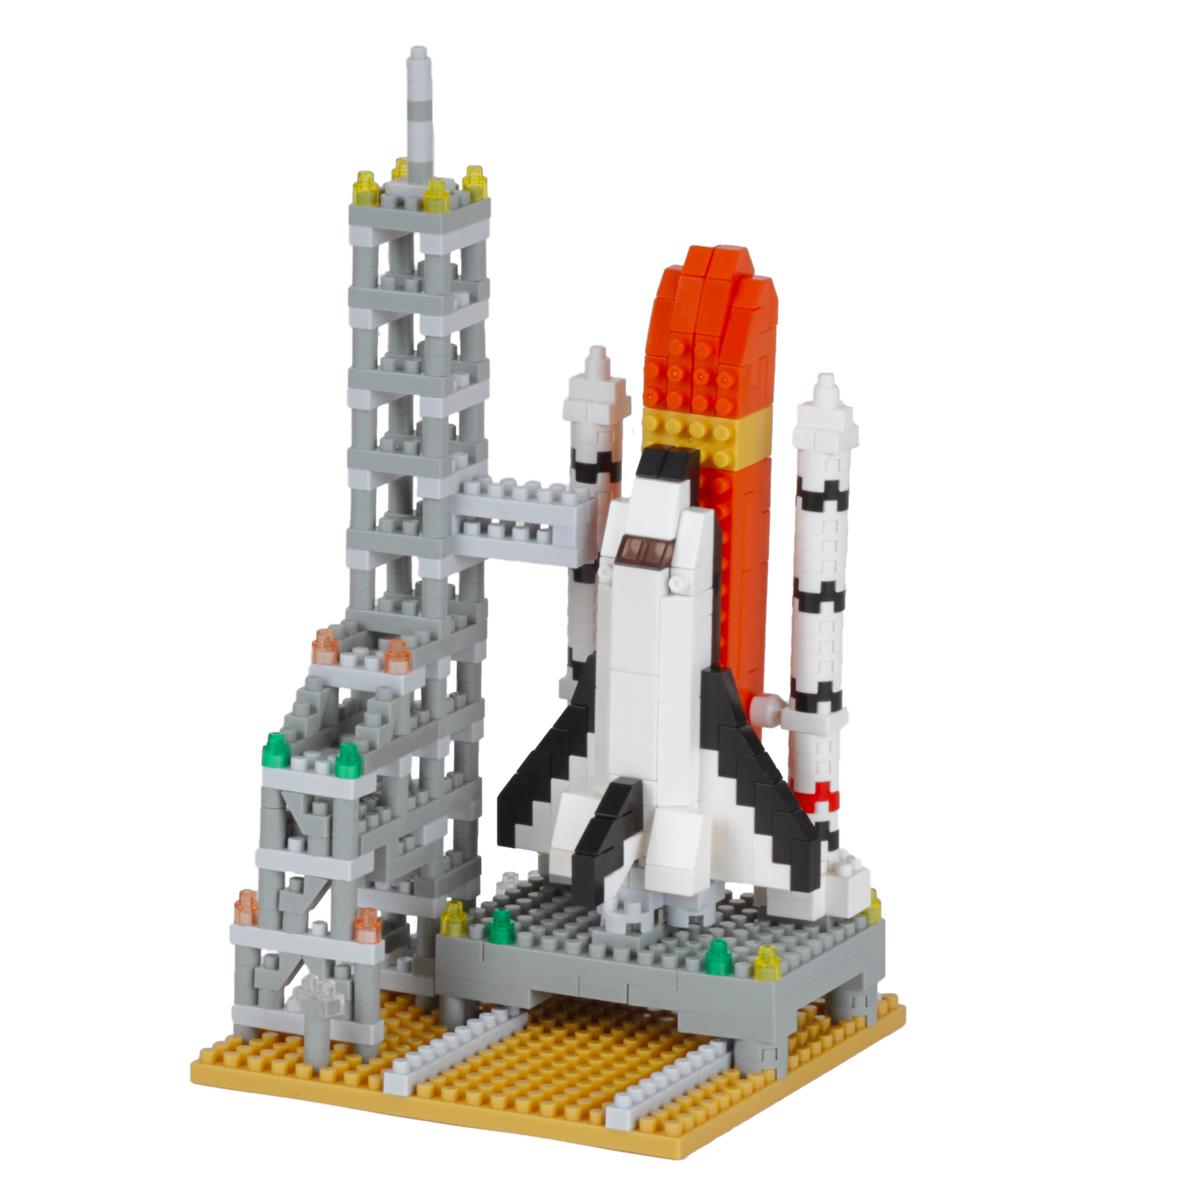 NBH-218 - Space Center